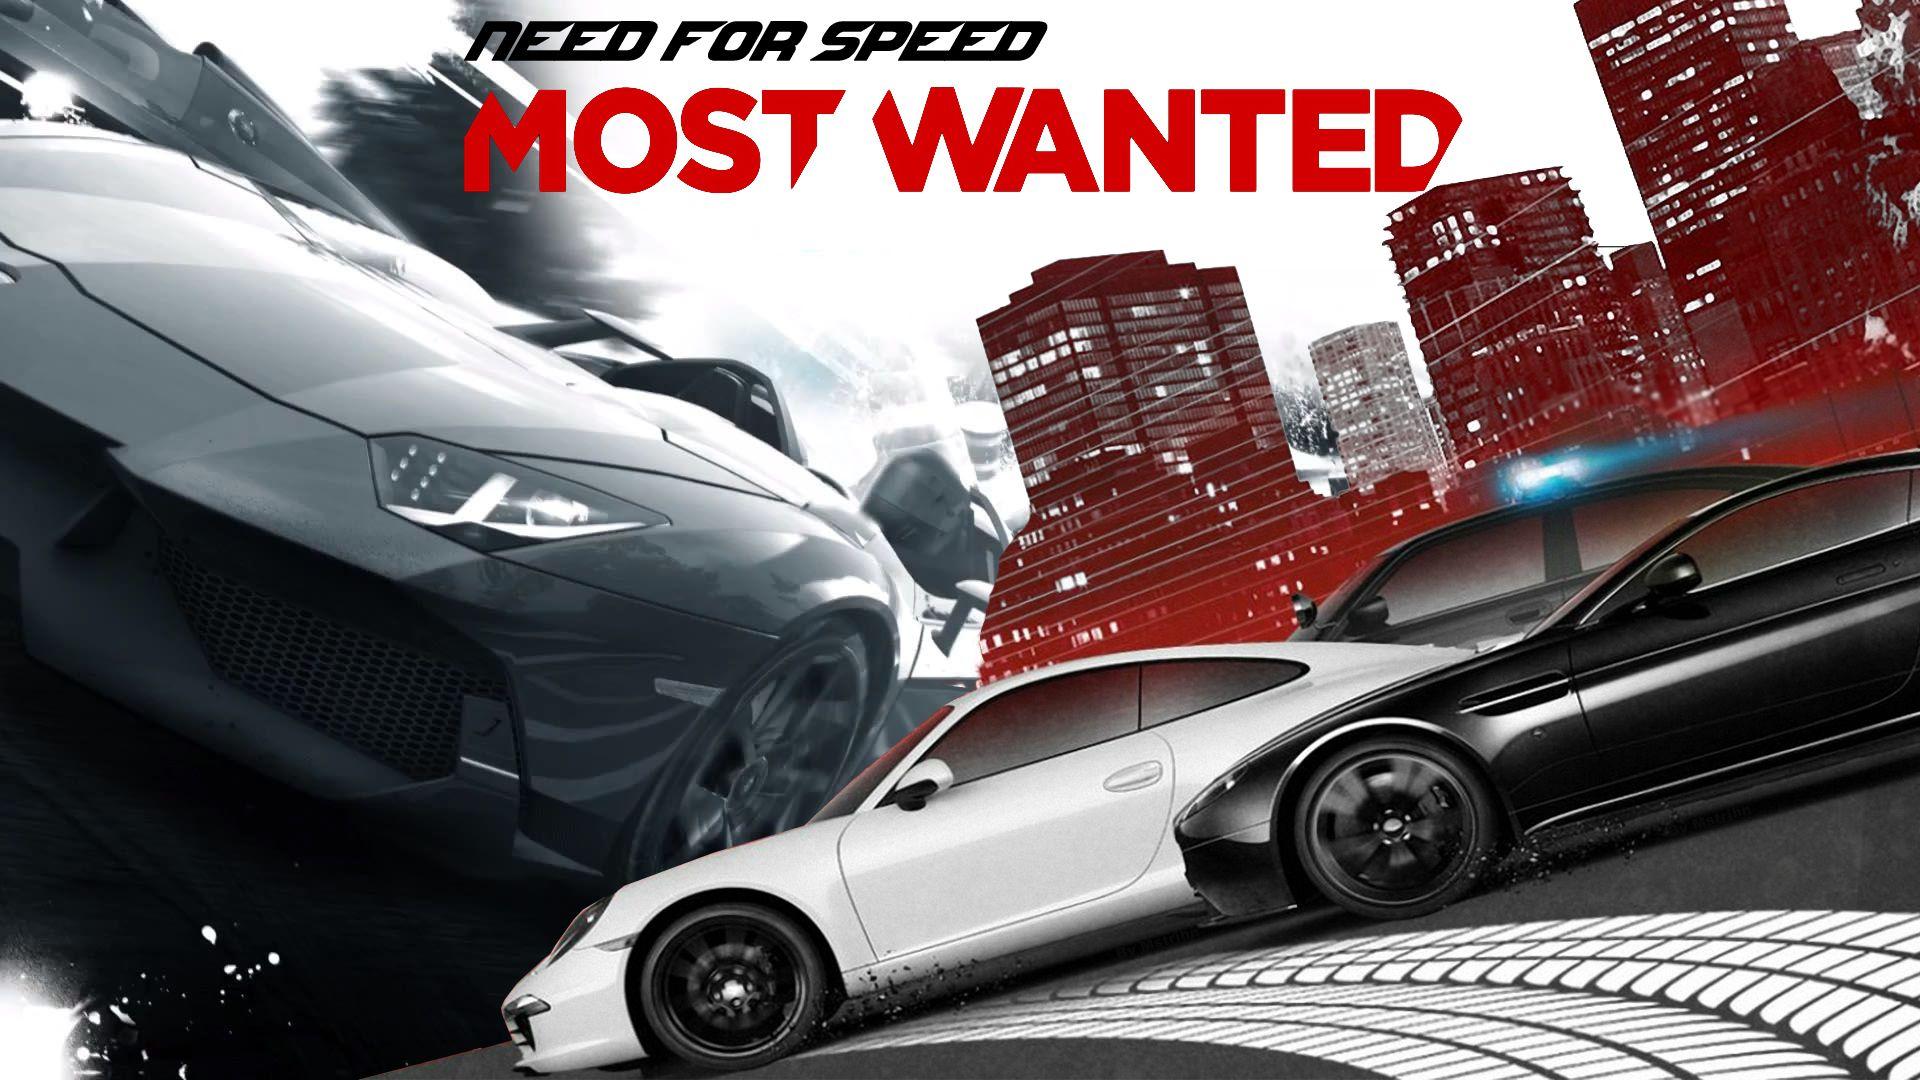 Need For Speed Most Wanted Review: Brings New Life on the Old